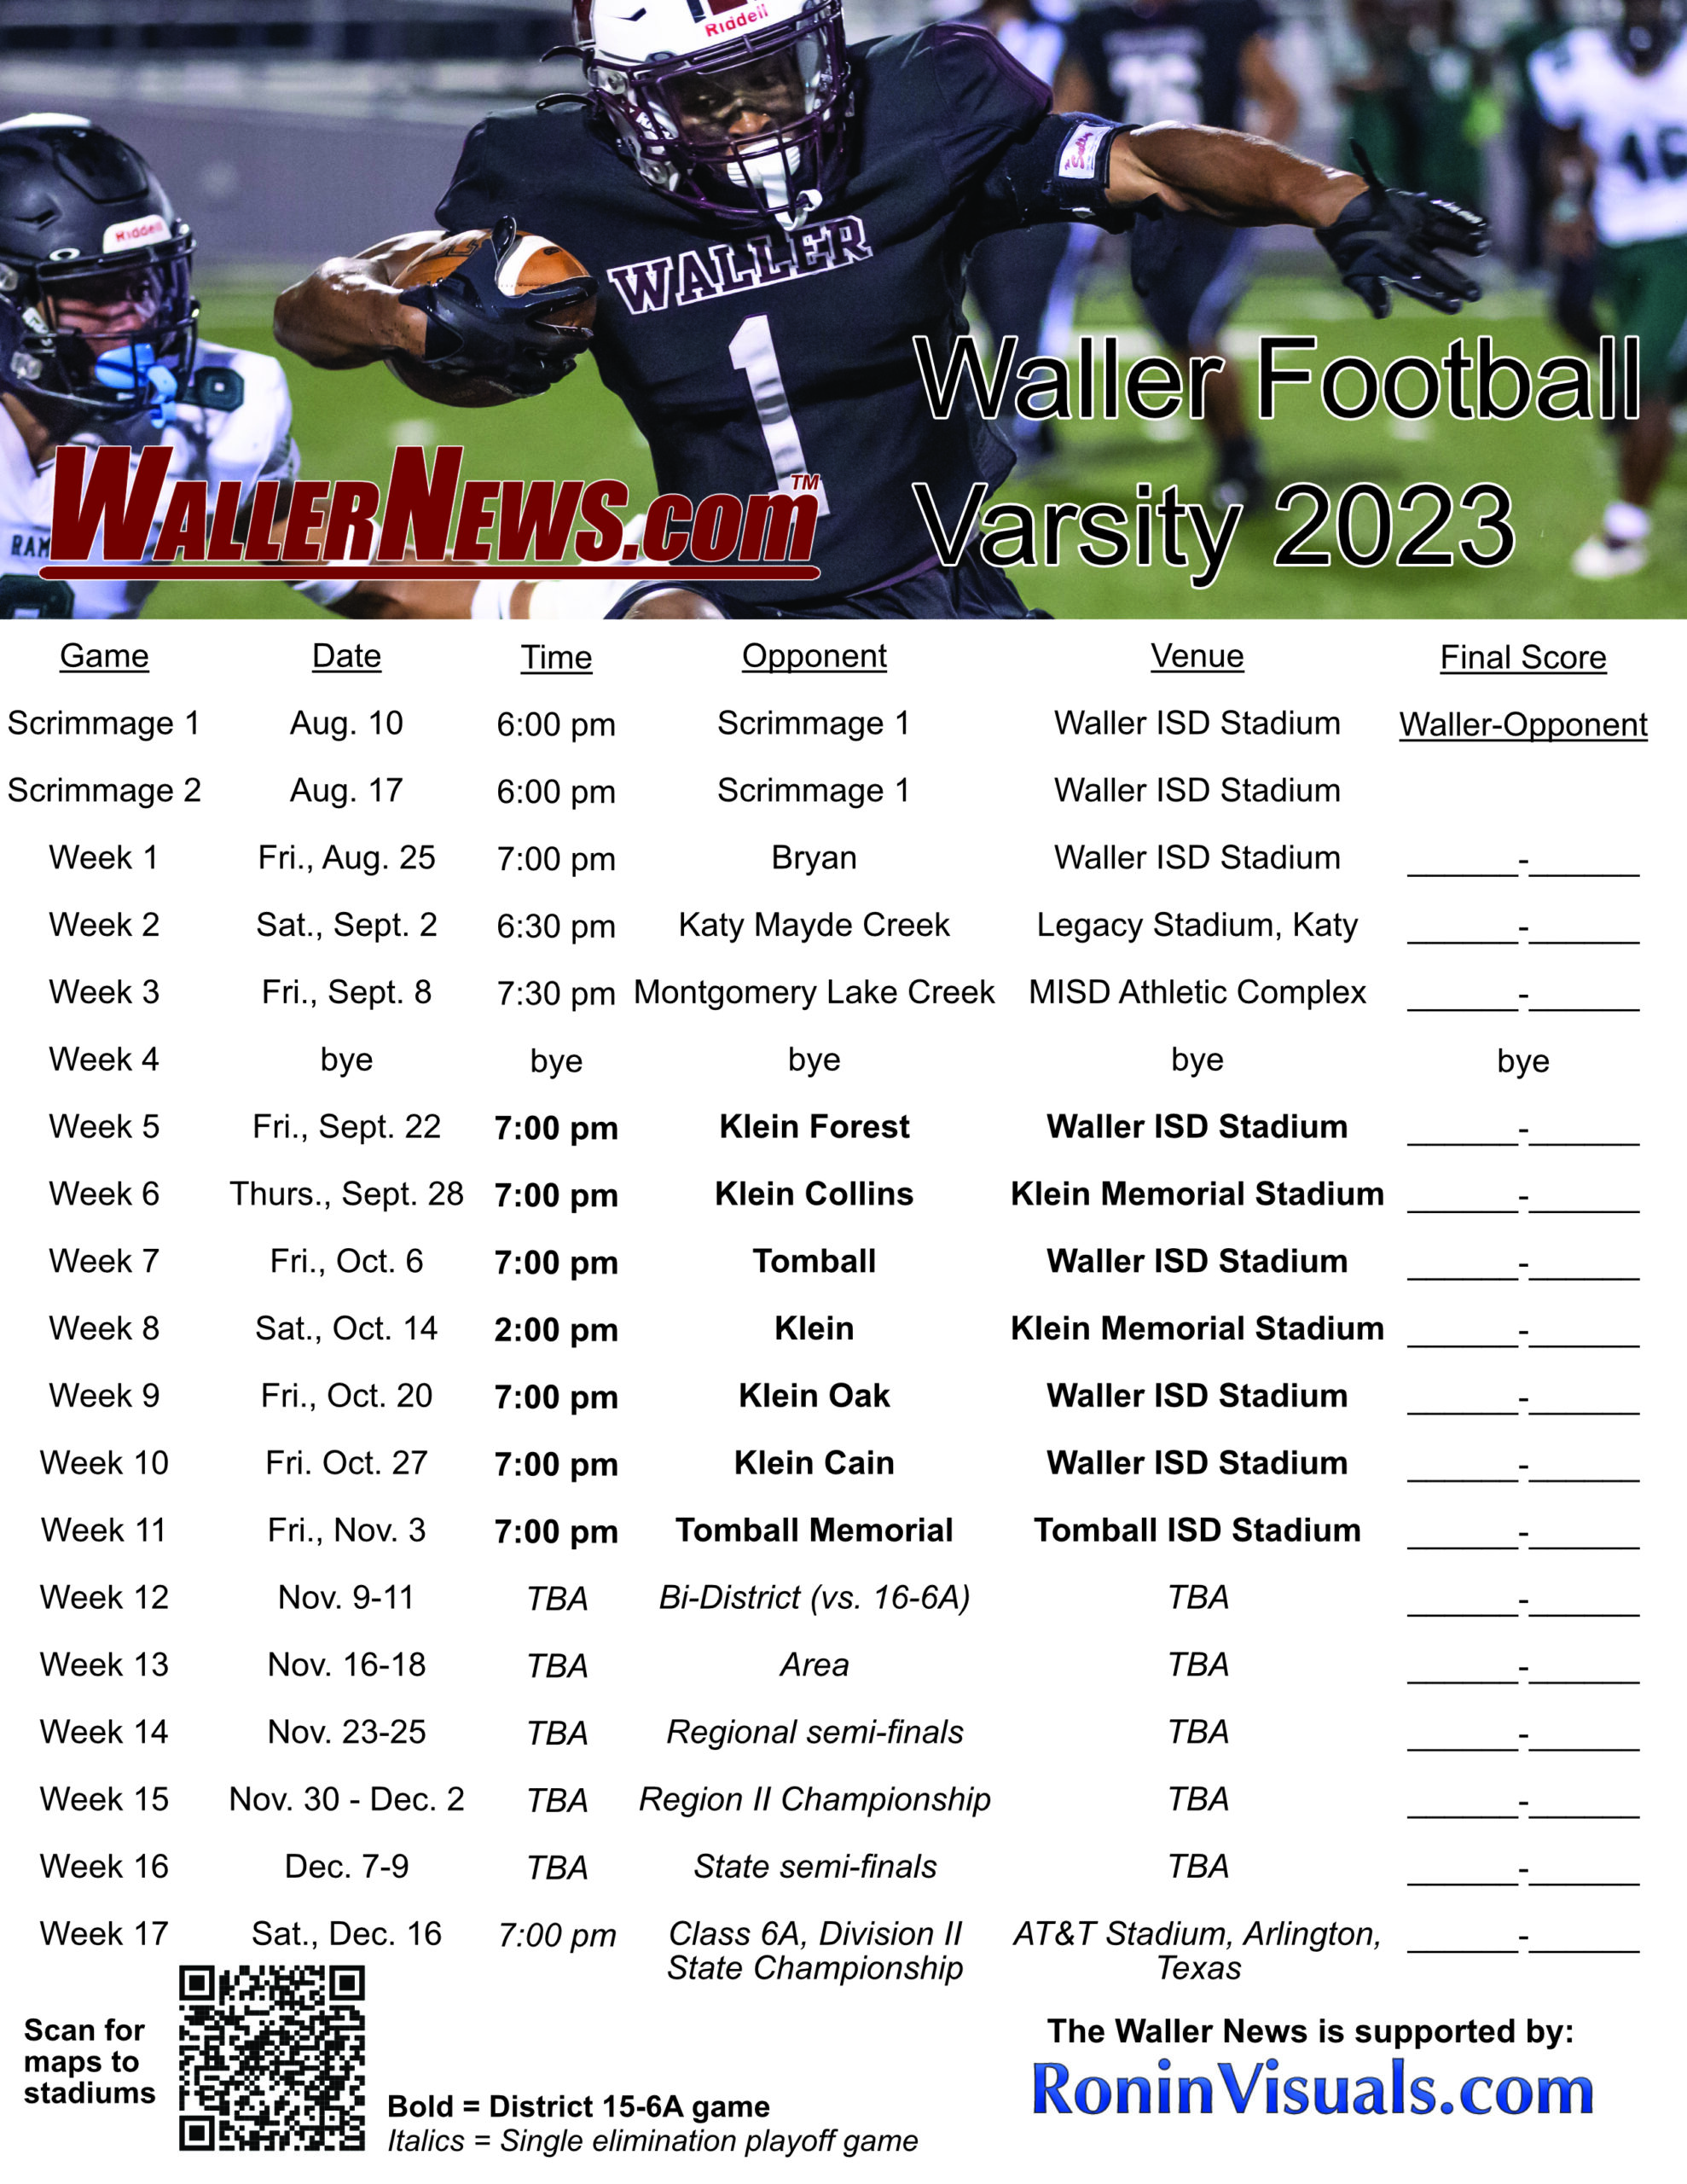 The varsity Waller Bulldog schedule in easy to download form. (crafted by WallerNews.com)